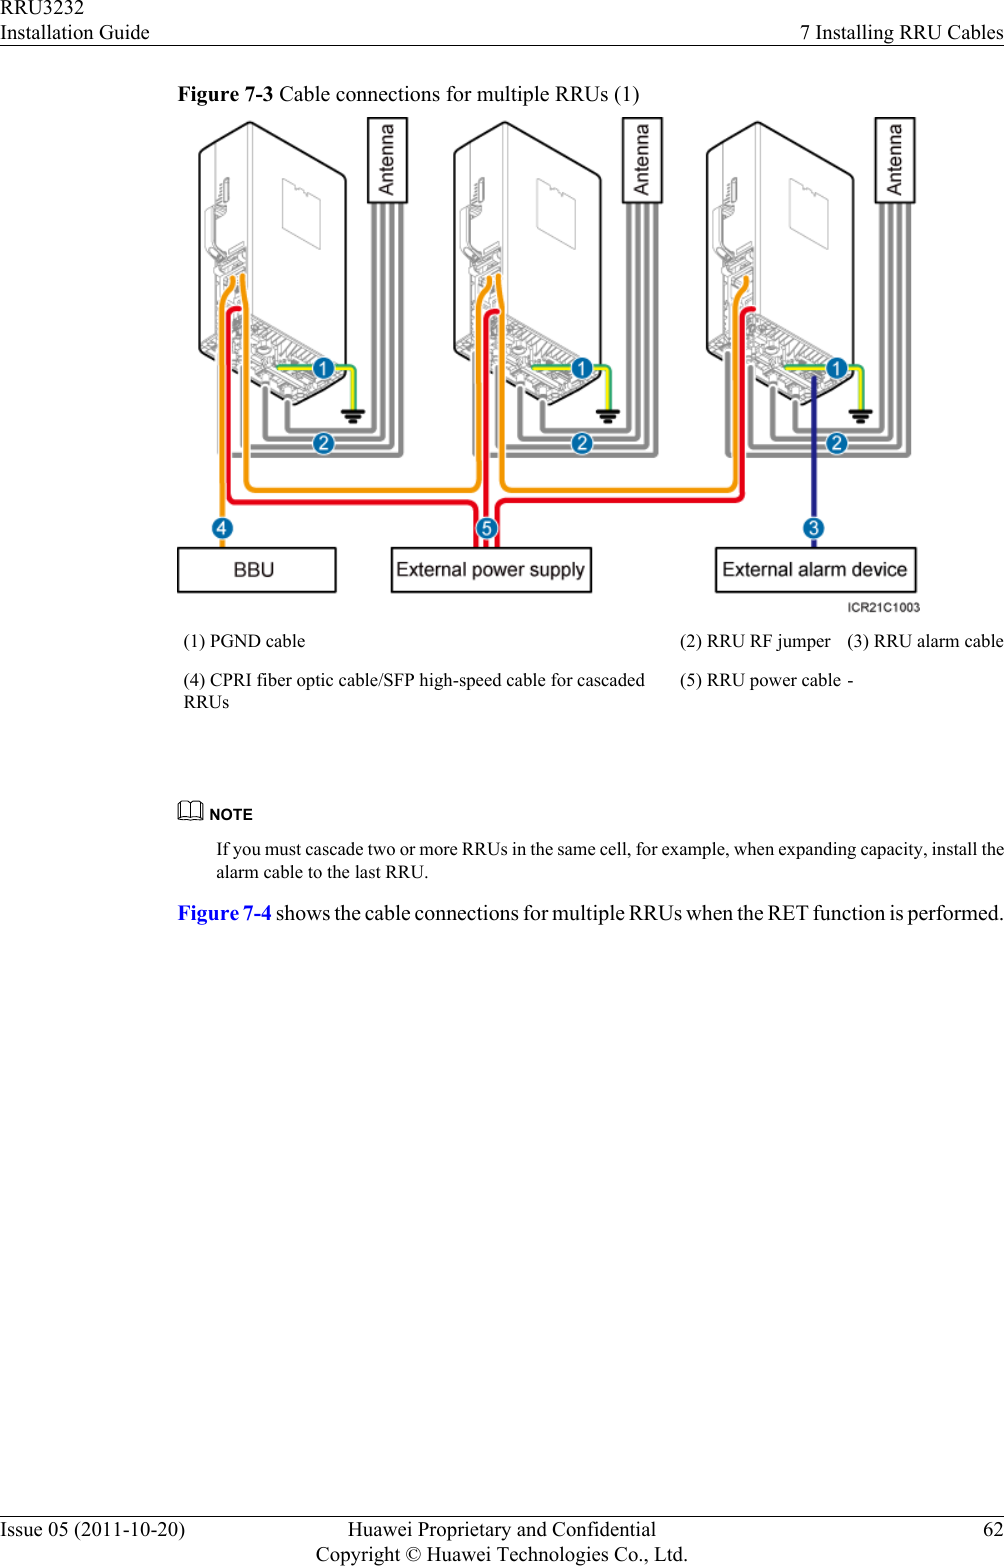 Figure 7-3 Cable connections for multiple RRUs (1)(1) PGND cable (2) RRU RF jumper (3) RRU alarm cable(4) CPRI fiber optic cable/SFP high-speed cable for cascadedRRUs(5) RRU power cable - NOTEIf you must cascade two or more RRUs in the same cell, for example, when expanding capacity, install thealarm cable to the last RRU.Figure 7-4 shows the cable connections for multiple RRUs when the RET function is performed.RRU3232Installation Guide 7 Installing RRU CablesIssue 05 (2011-10-20) Huawei Proprietary and ConfidentialCopyright © Huawei Technologies Co., Ltd.62